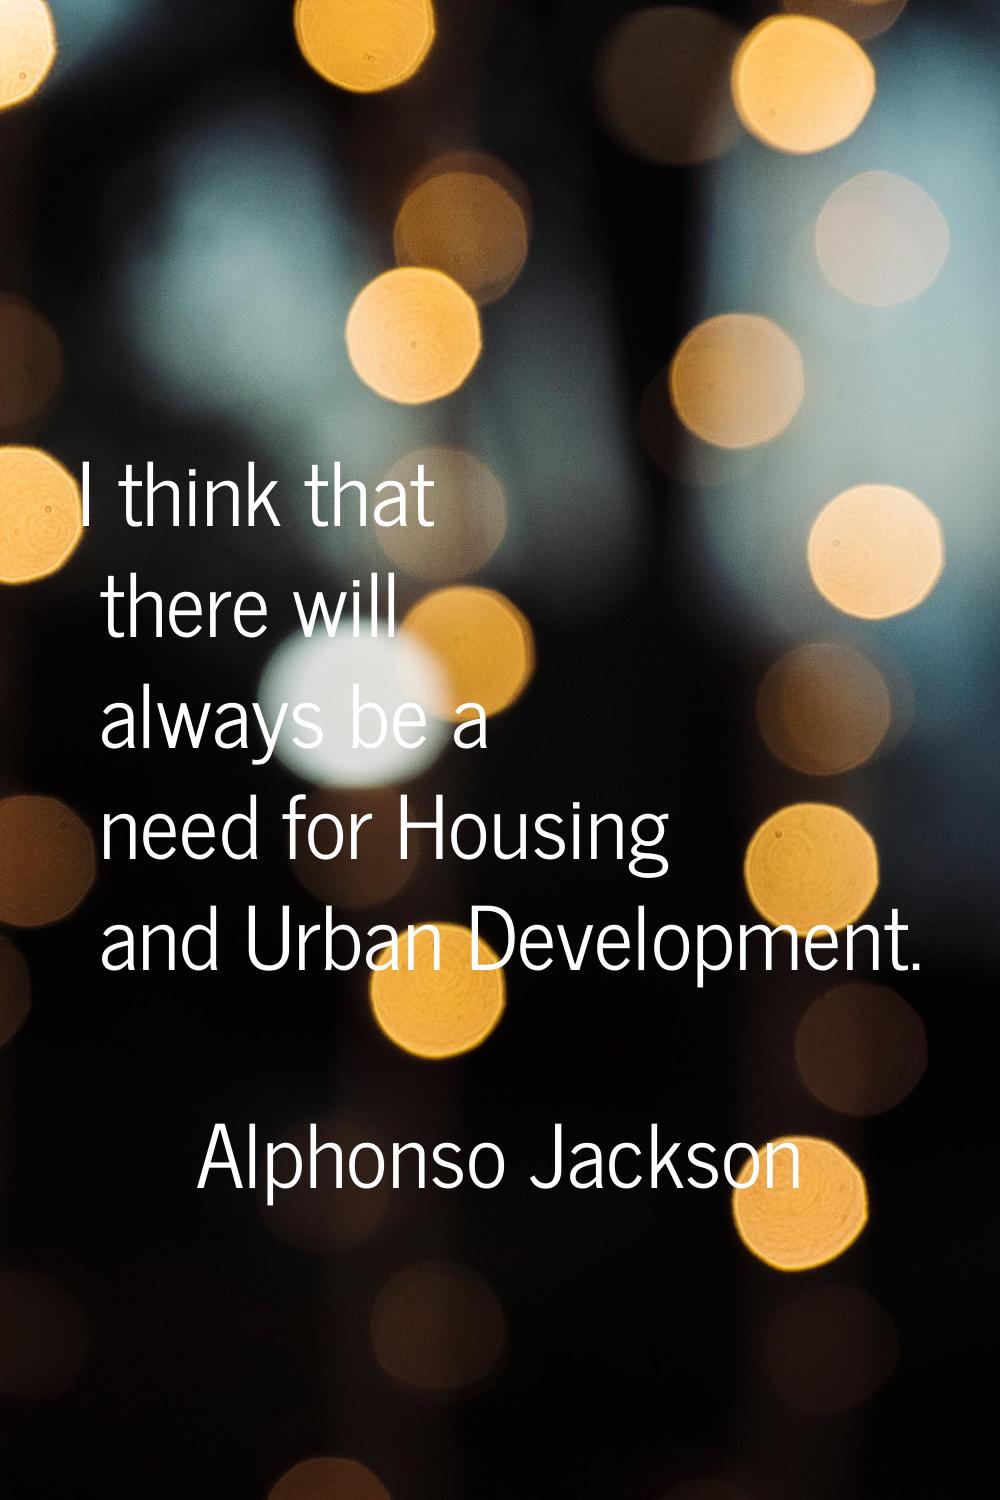 I think that there will always be a need for Housing and Urban Development.